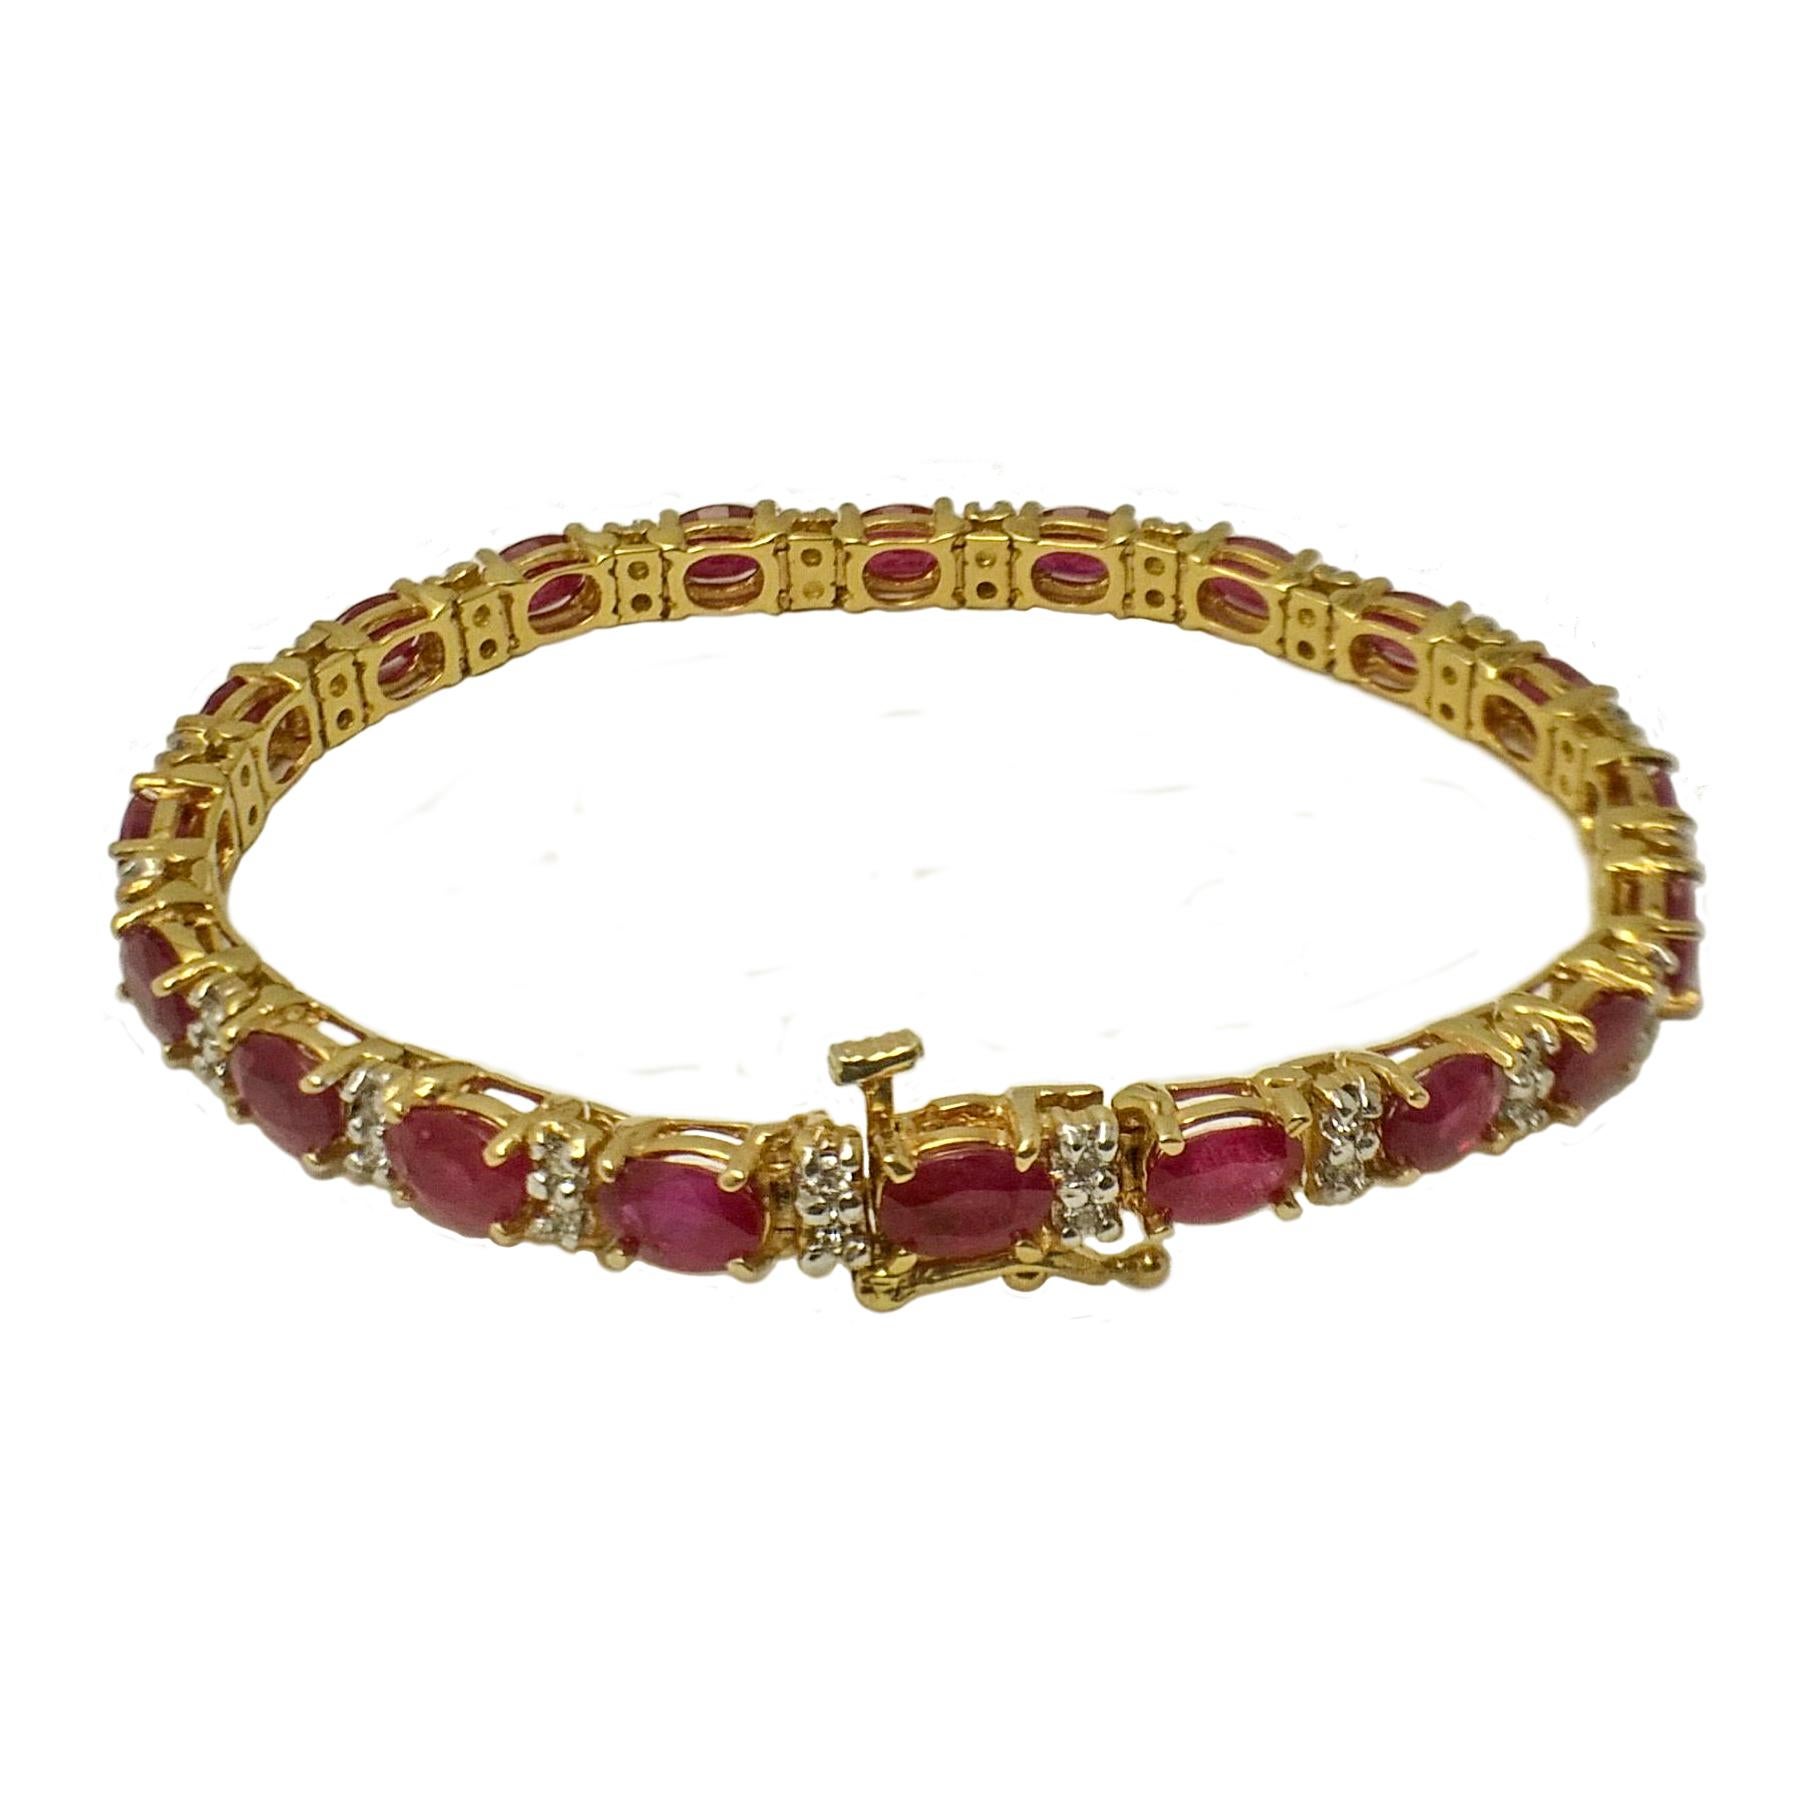 Elegant ruby and diamond bracelet in yellow gold. Lively red, luster, oval faceted, rubies linked with round brilliant cut diamonds. Beautiful, flexible design set in 14 karat yellow gold, with hinged clasp and safety catch. 

Ruby: 11 carats,